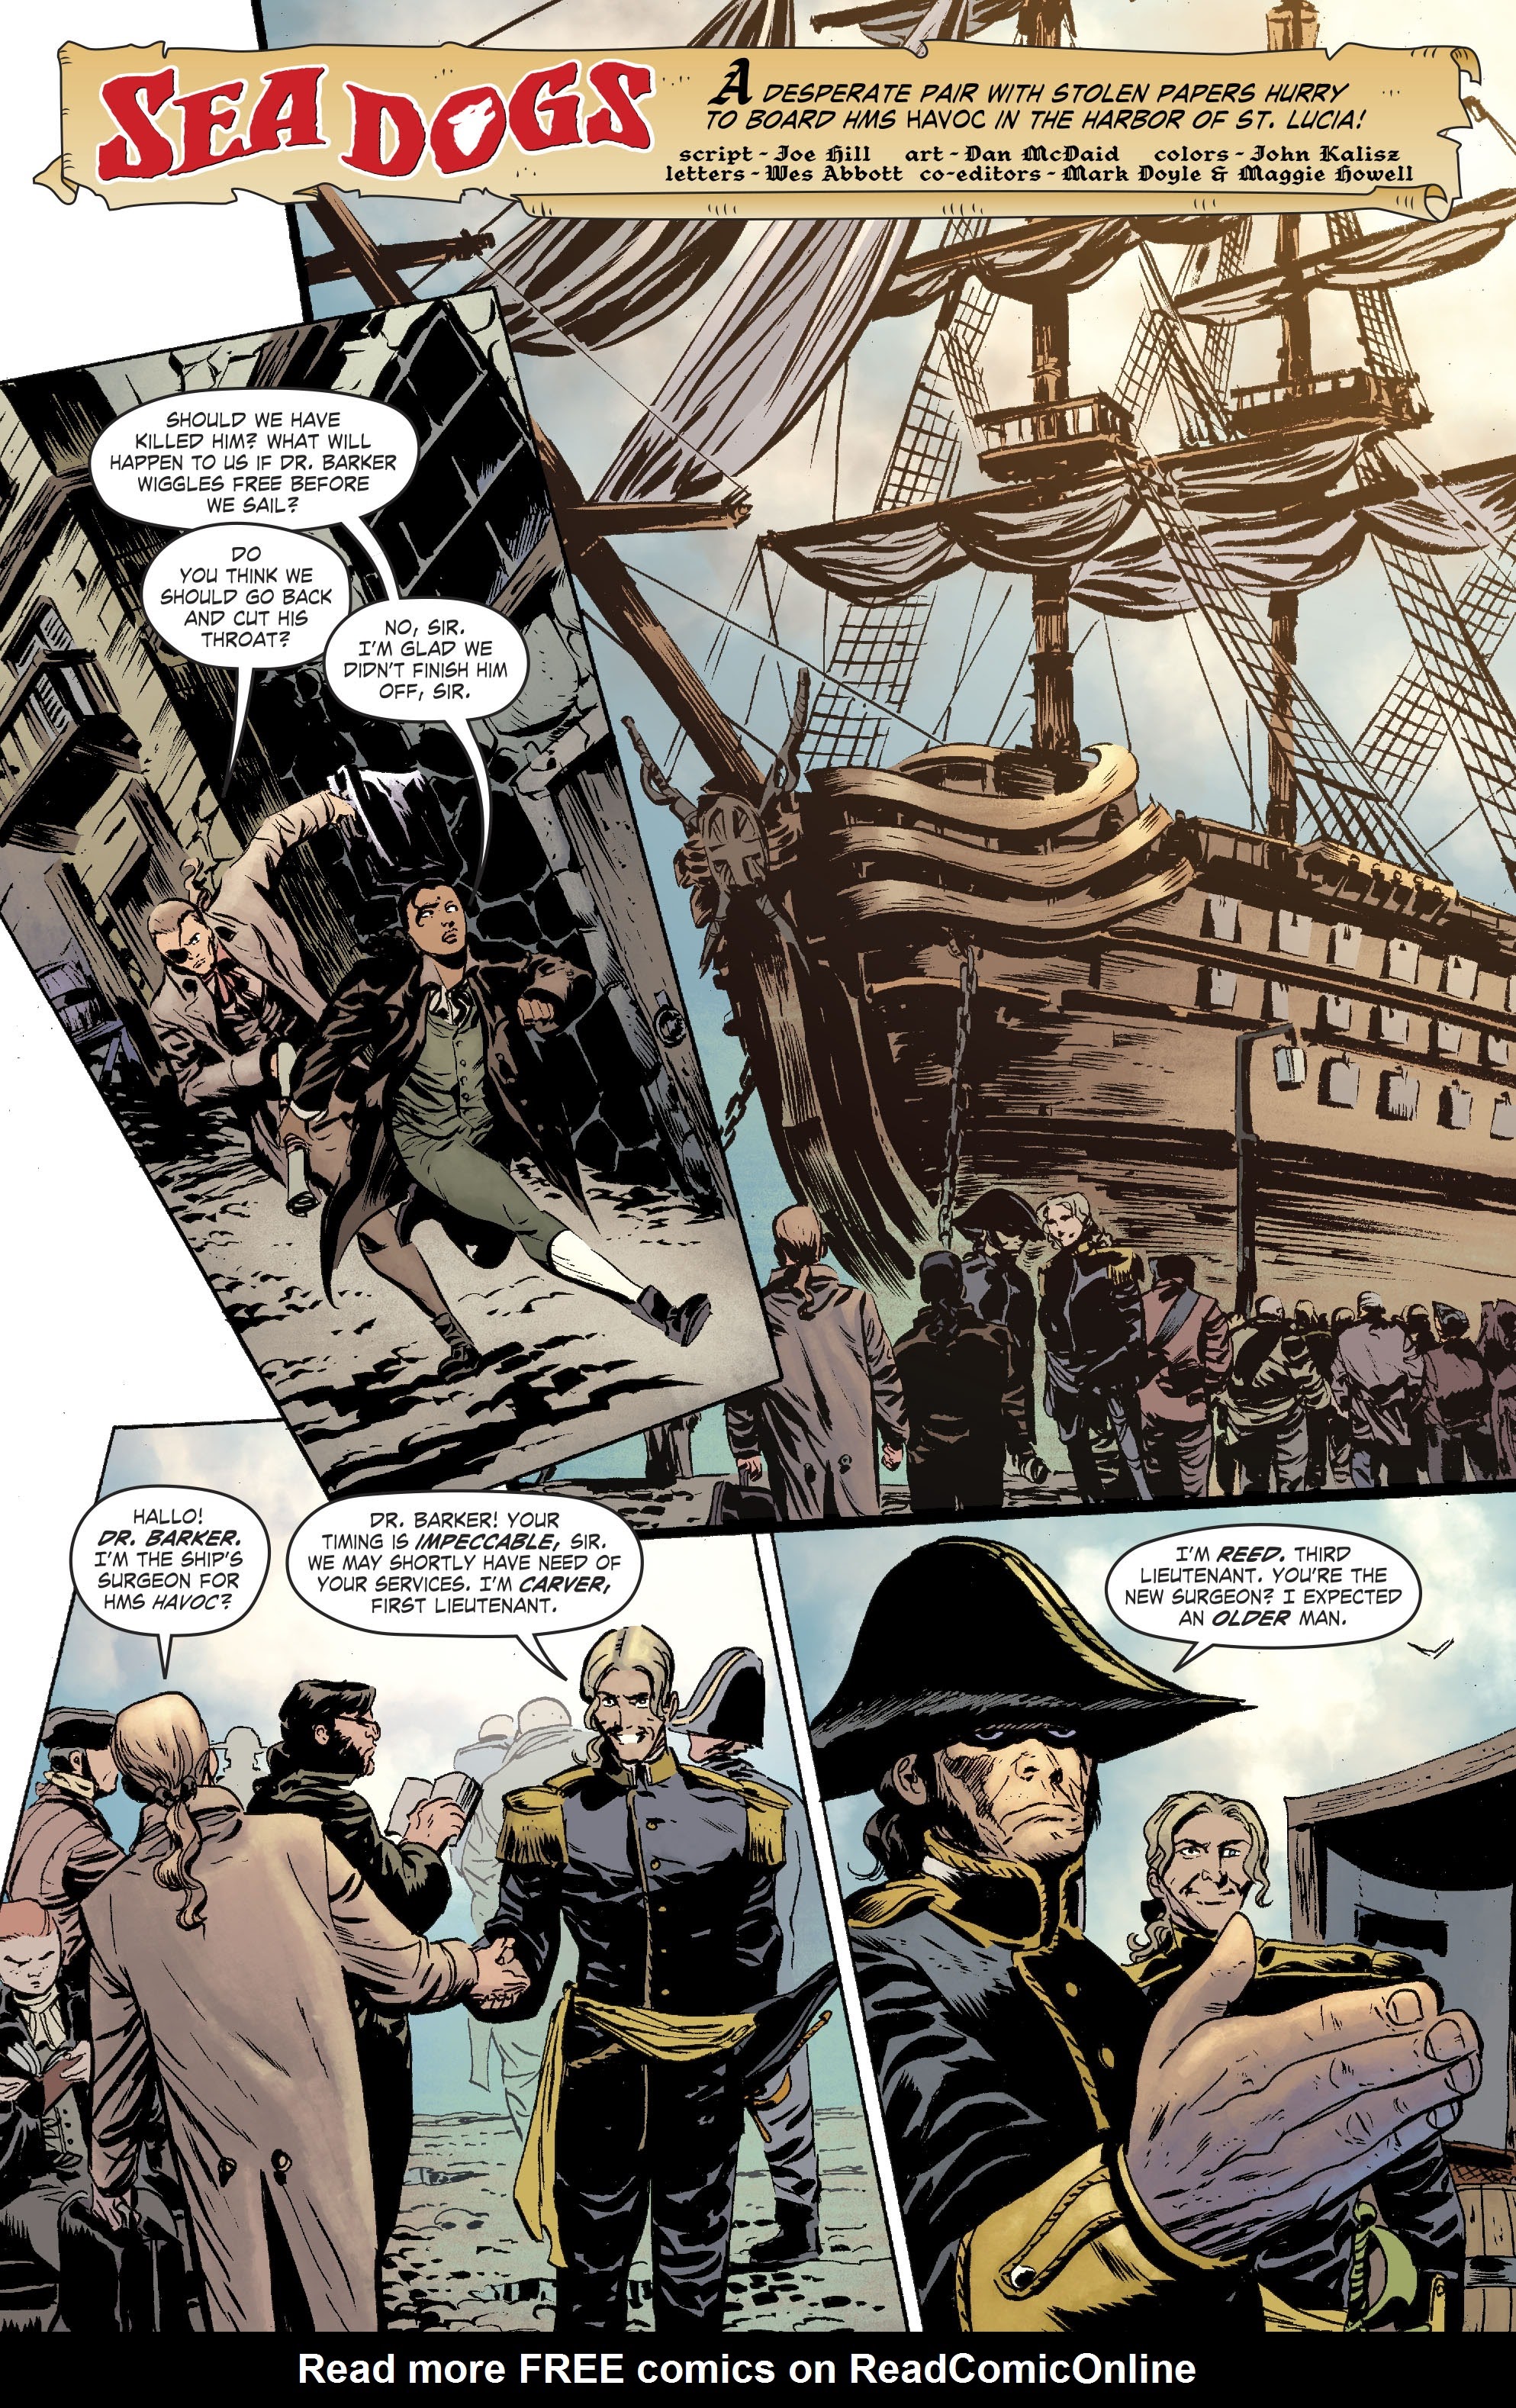 Read online Sea Dogs comic -  Issue # Full - 7